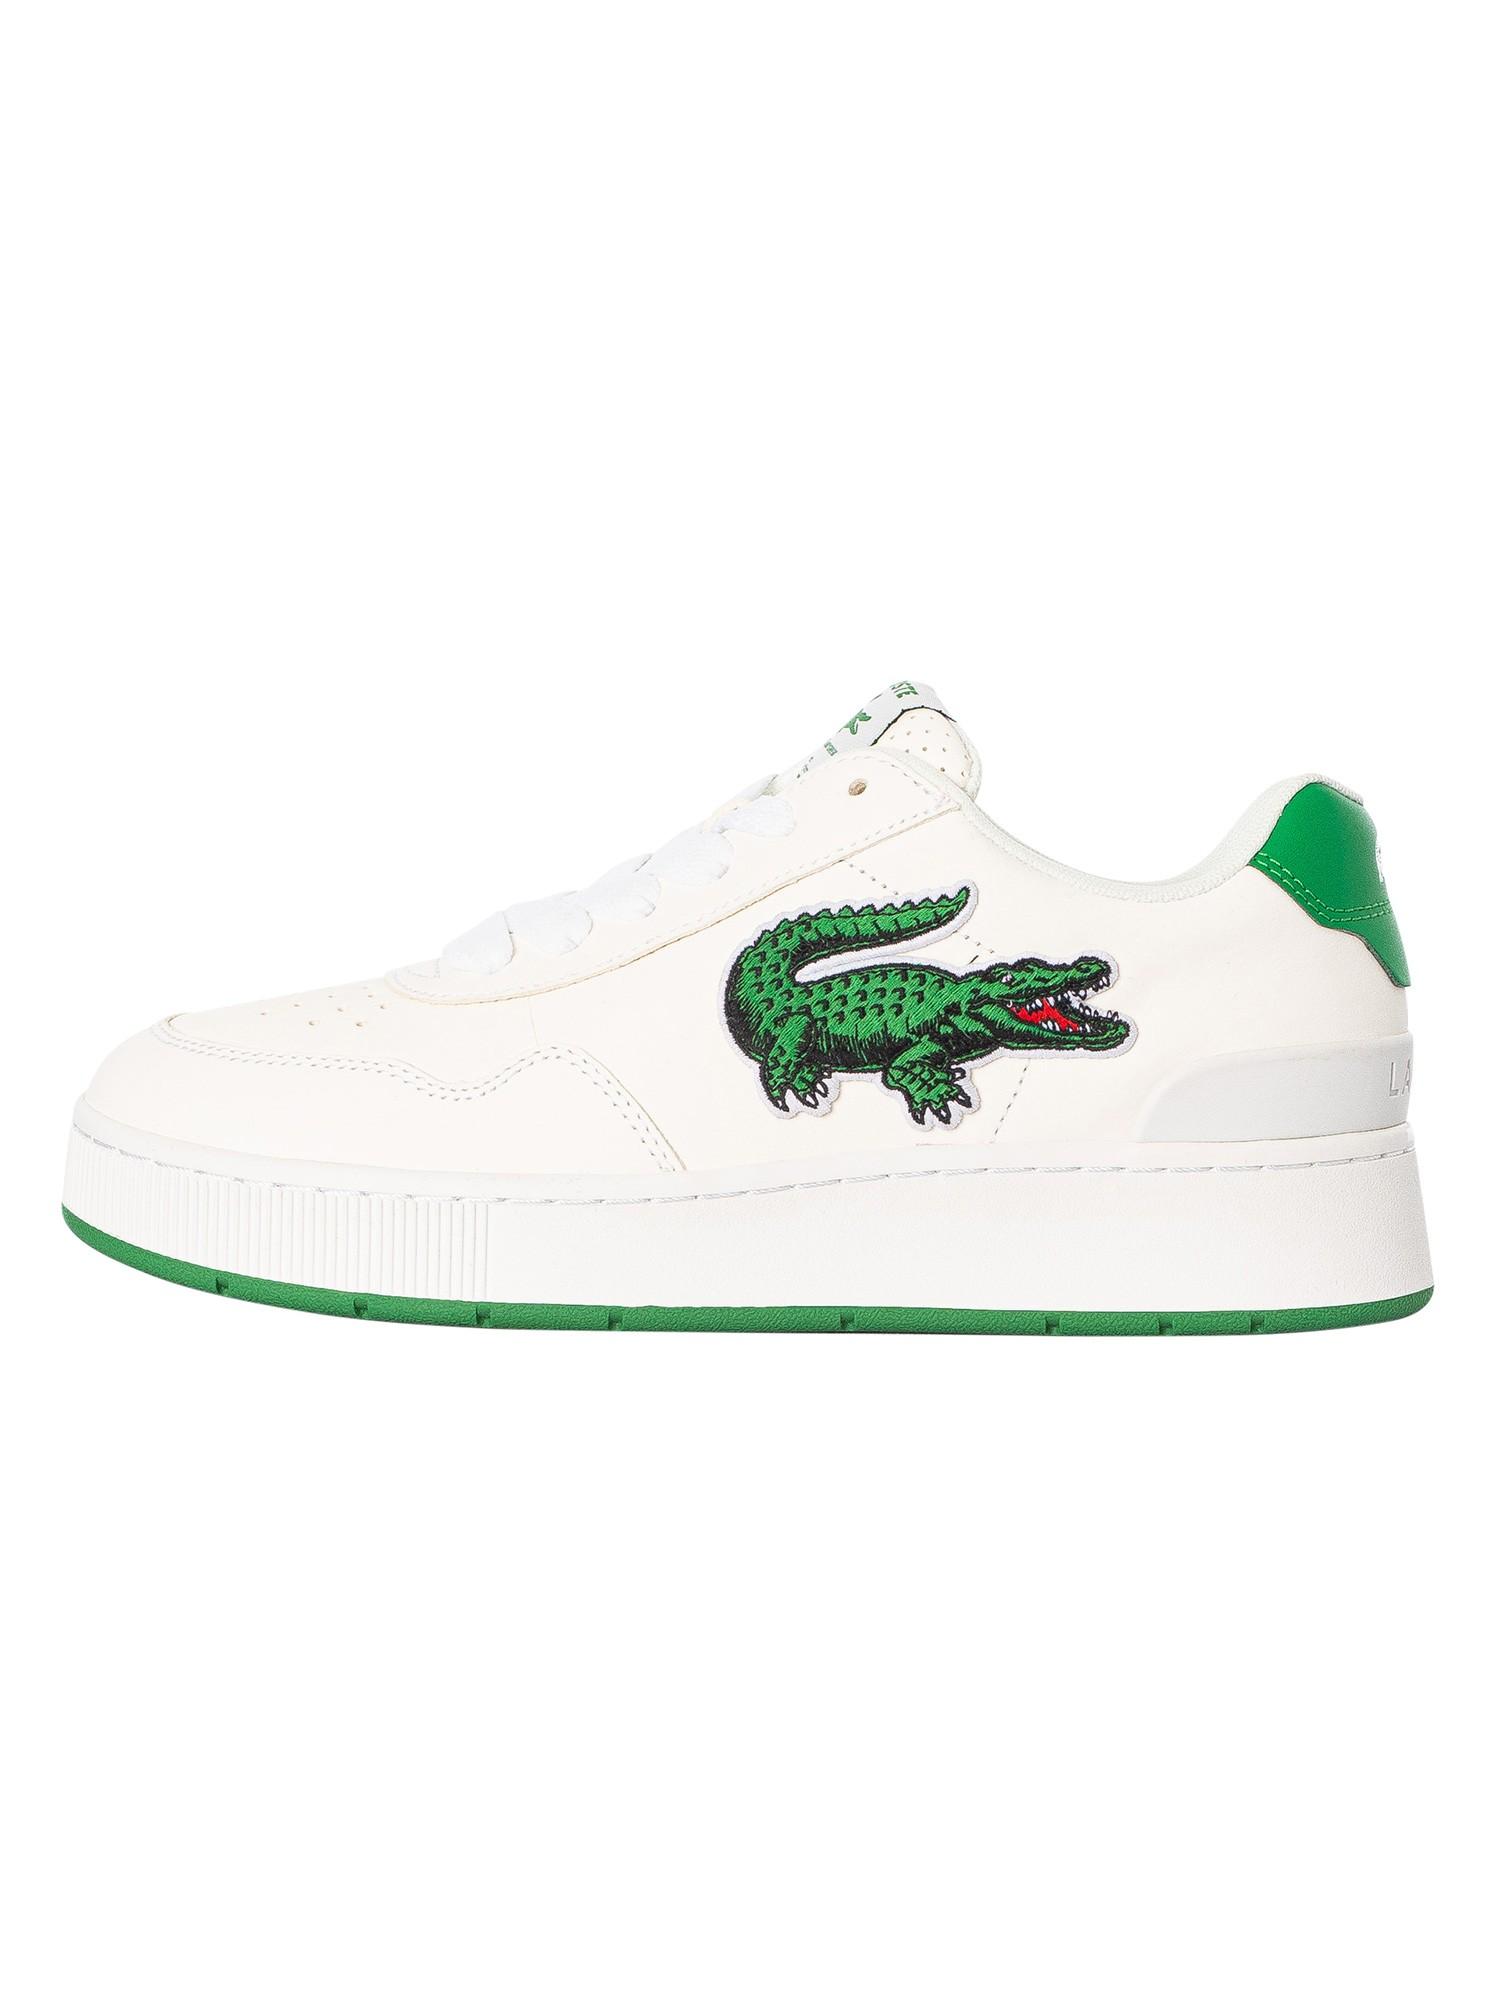 Lacoste Ace Clip 123 3 Sma Leather Trainers for Men | Lyst